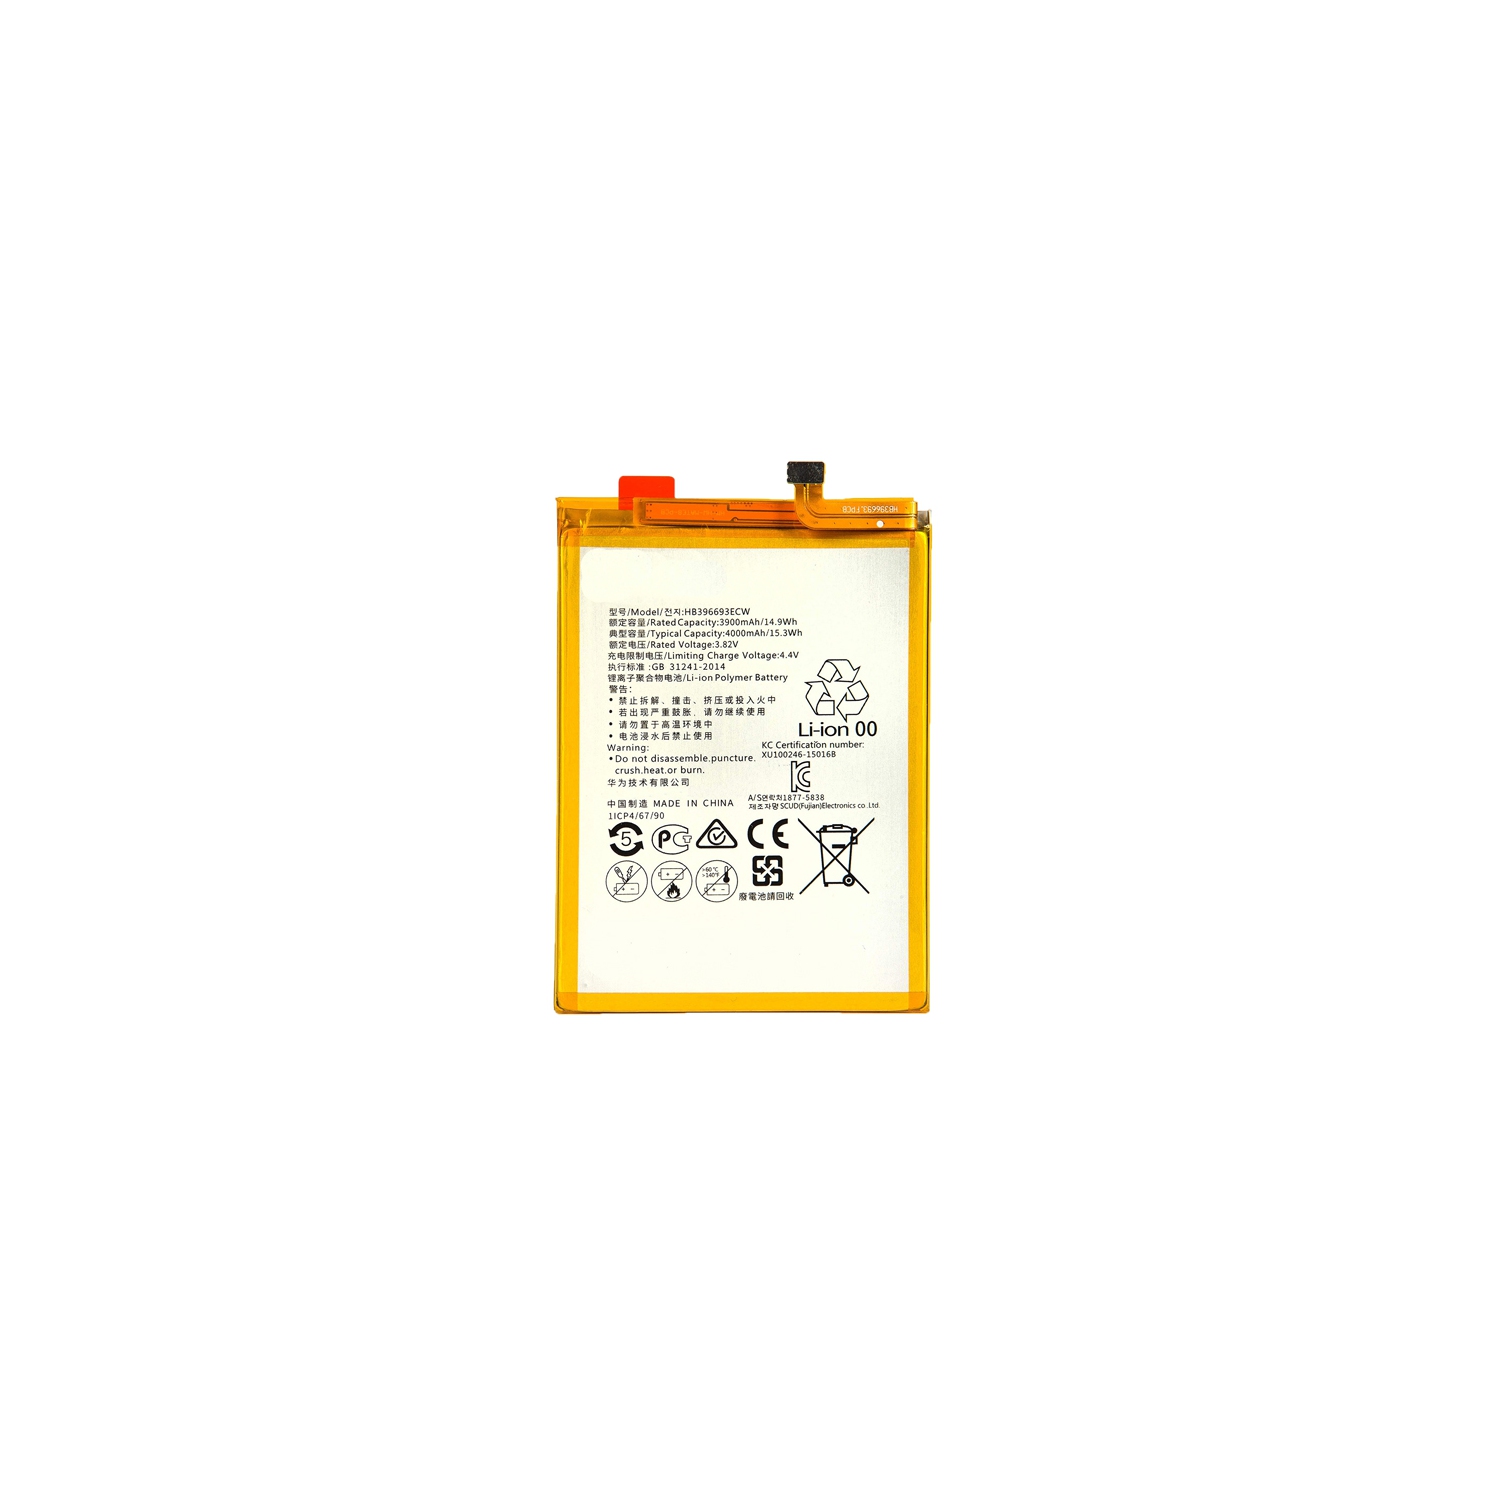 Replacement Battery HB396693ECW 4000 mAh For Huawei Mate 8